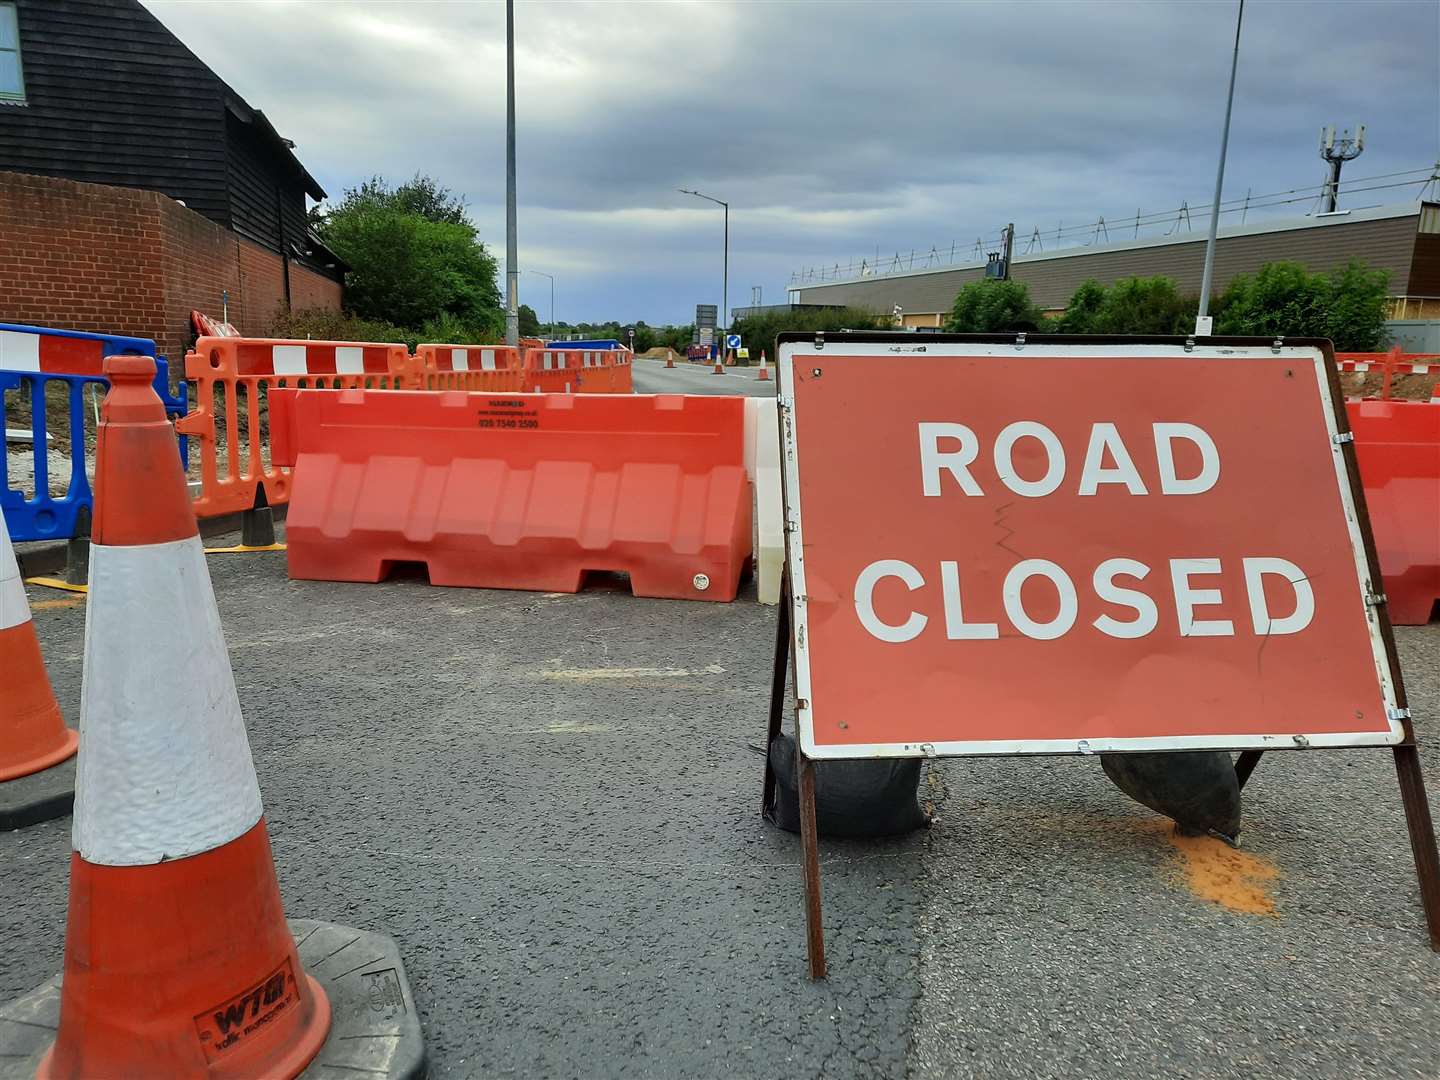 The route is expected to be shut for four days